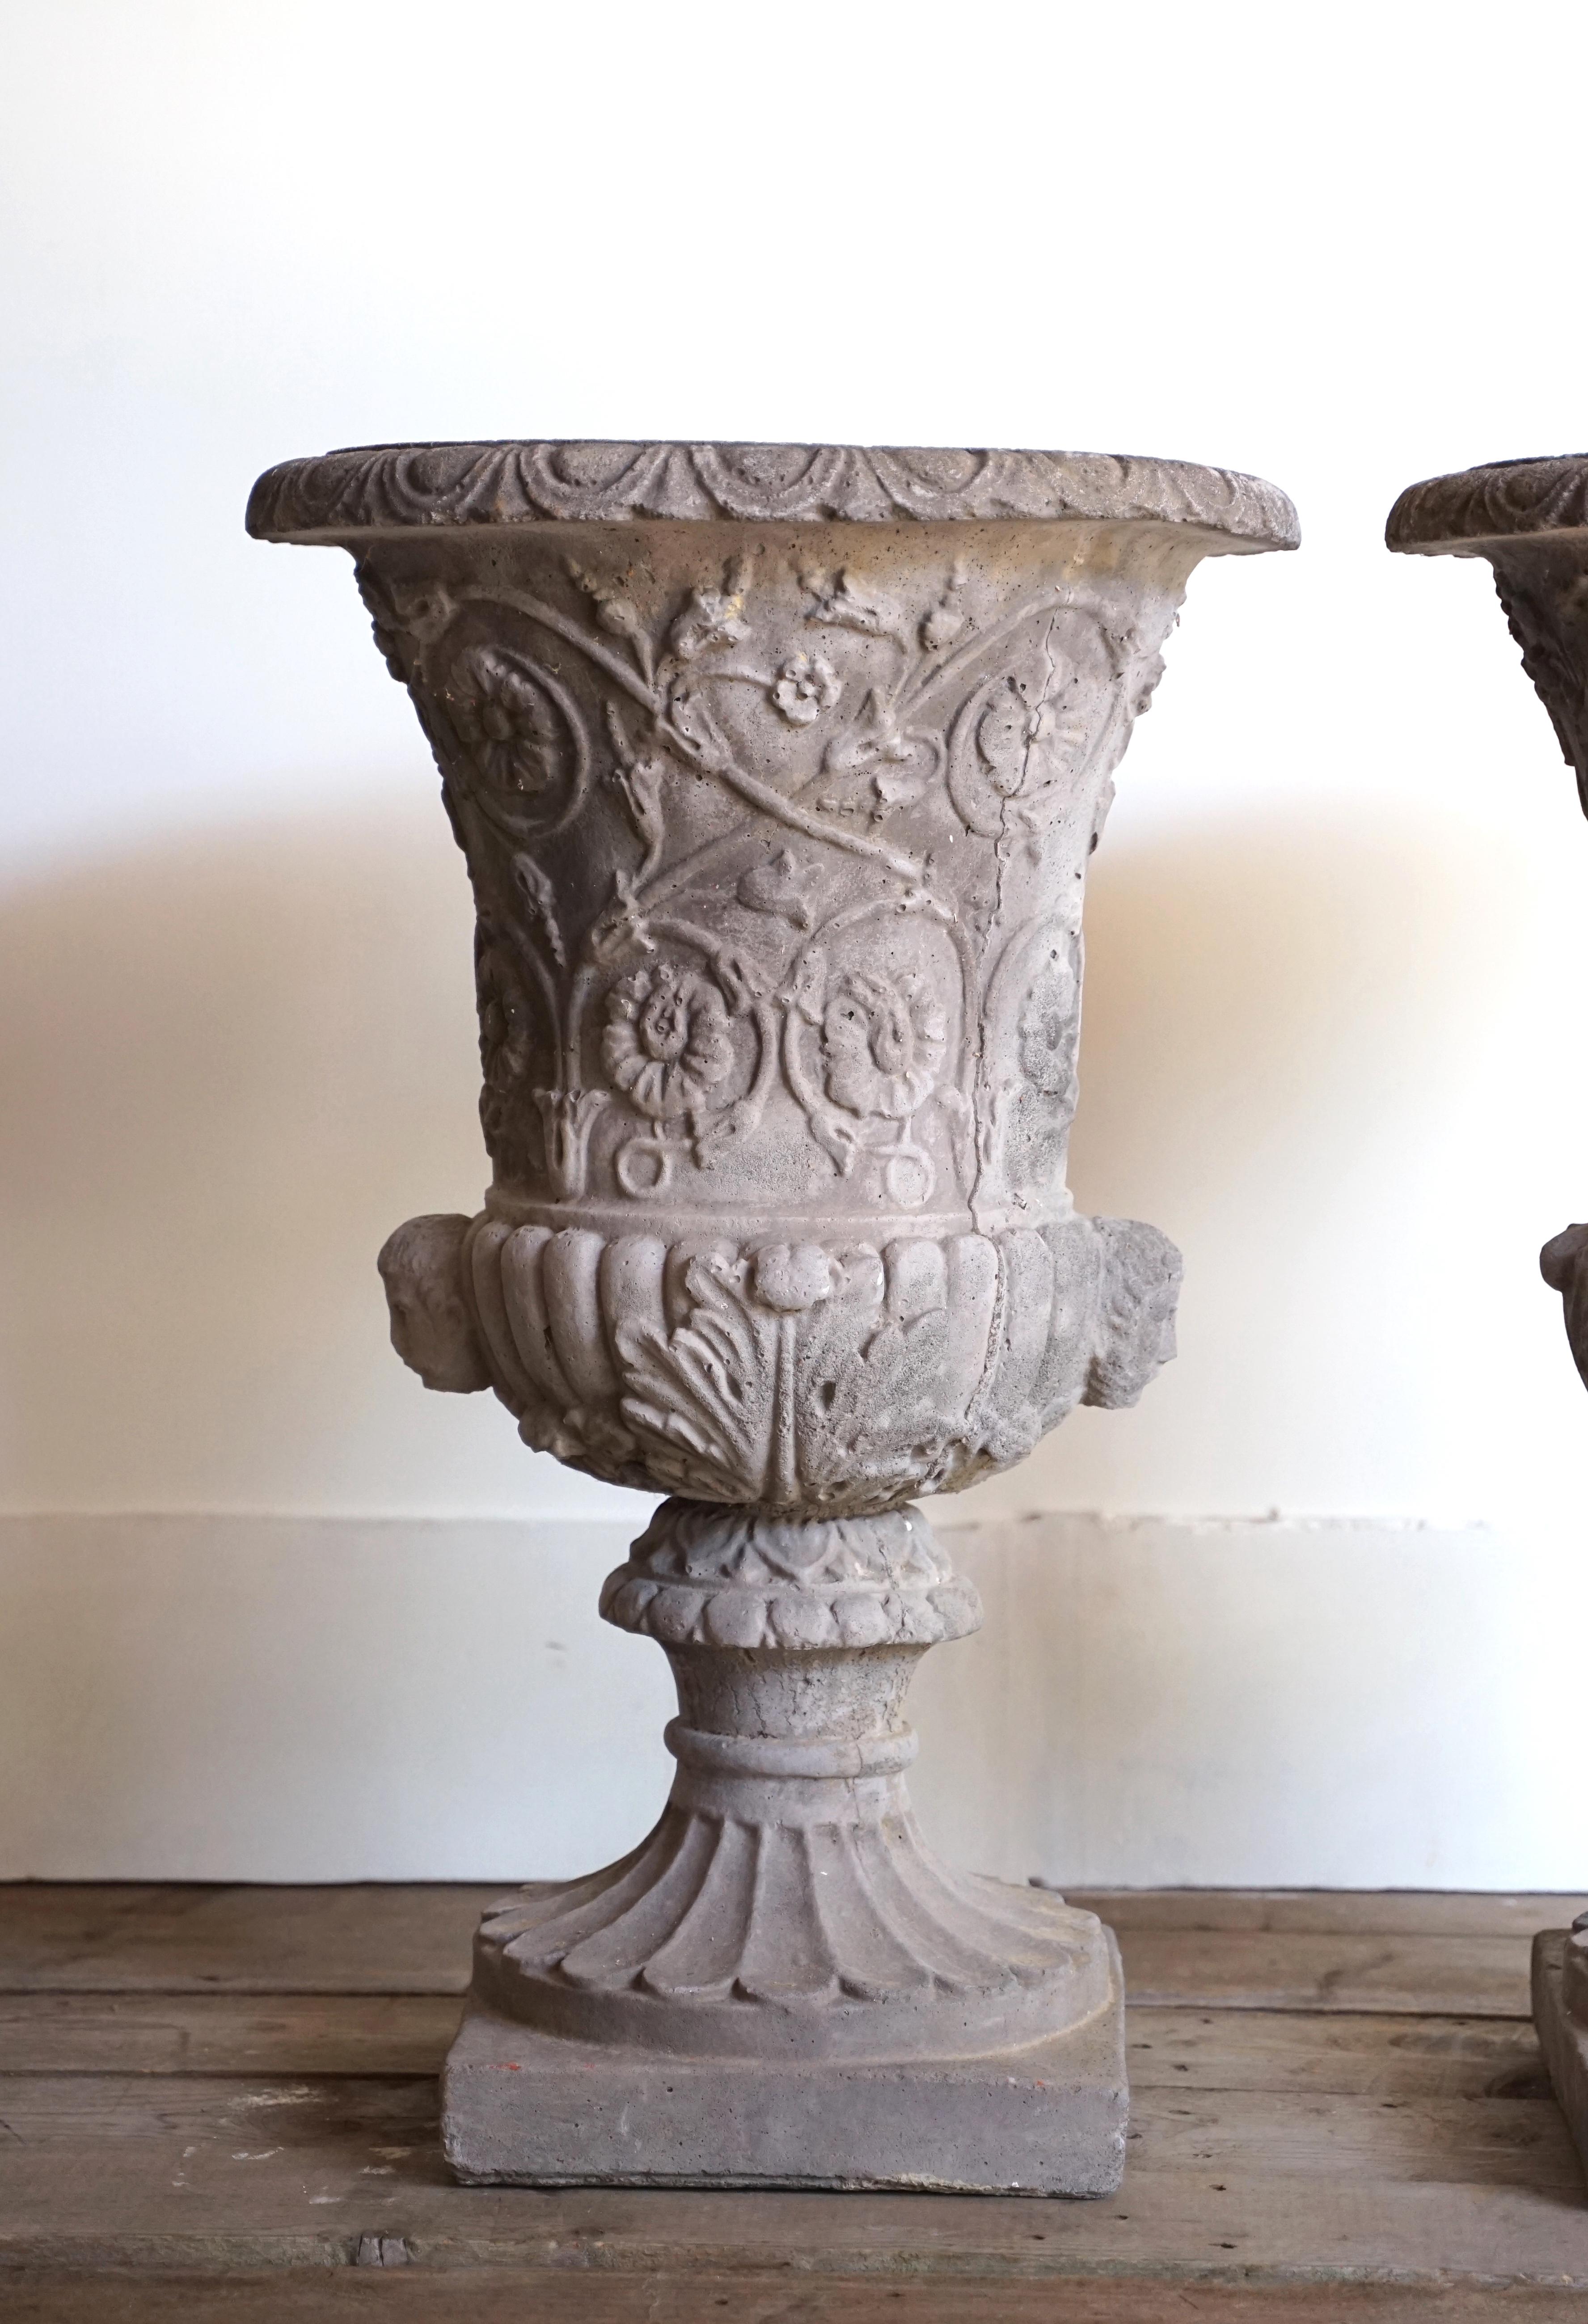 Age: 1930.
Measurements: 50 cm diameter, 77 cm height.
Material: Cement.
Condition: Good state of preservation, although showing signs of age.
Description: Beautiful pair of concrete vases; very well chiselled, ideal for decorating any outdoor